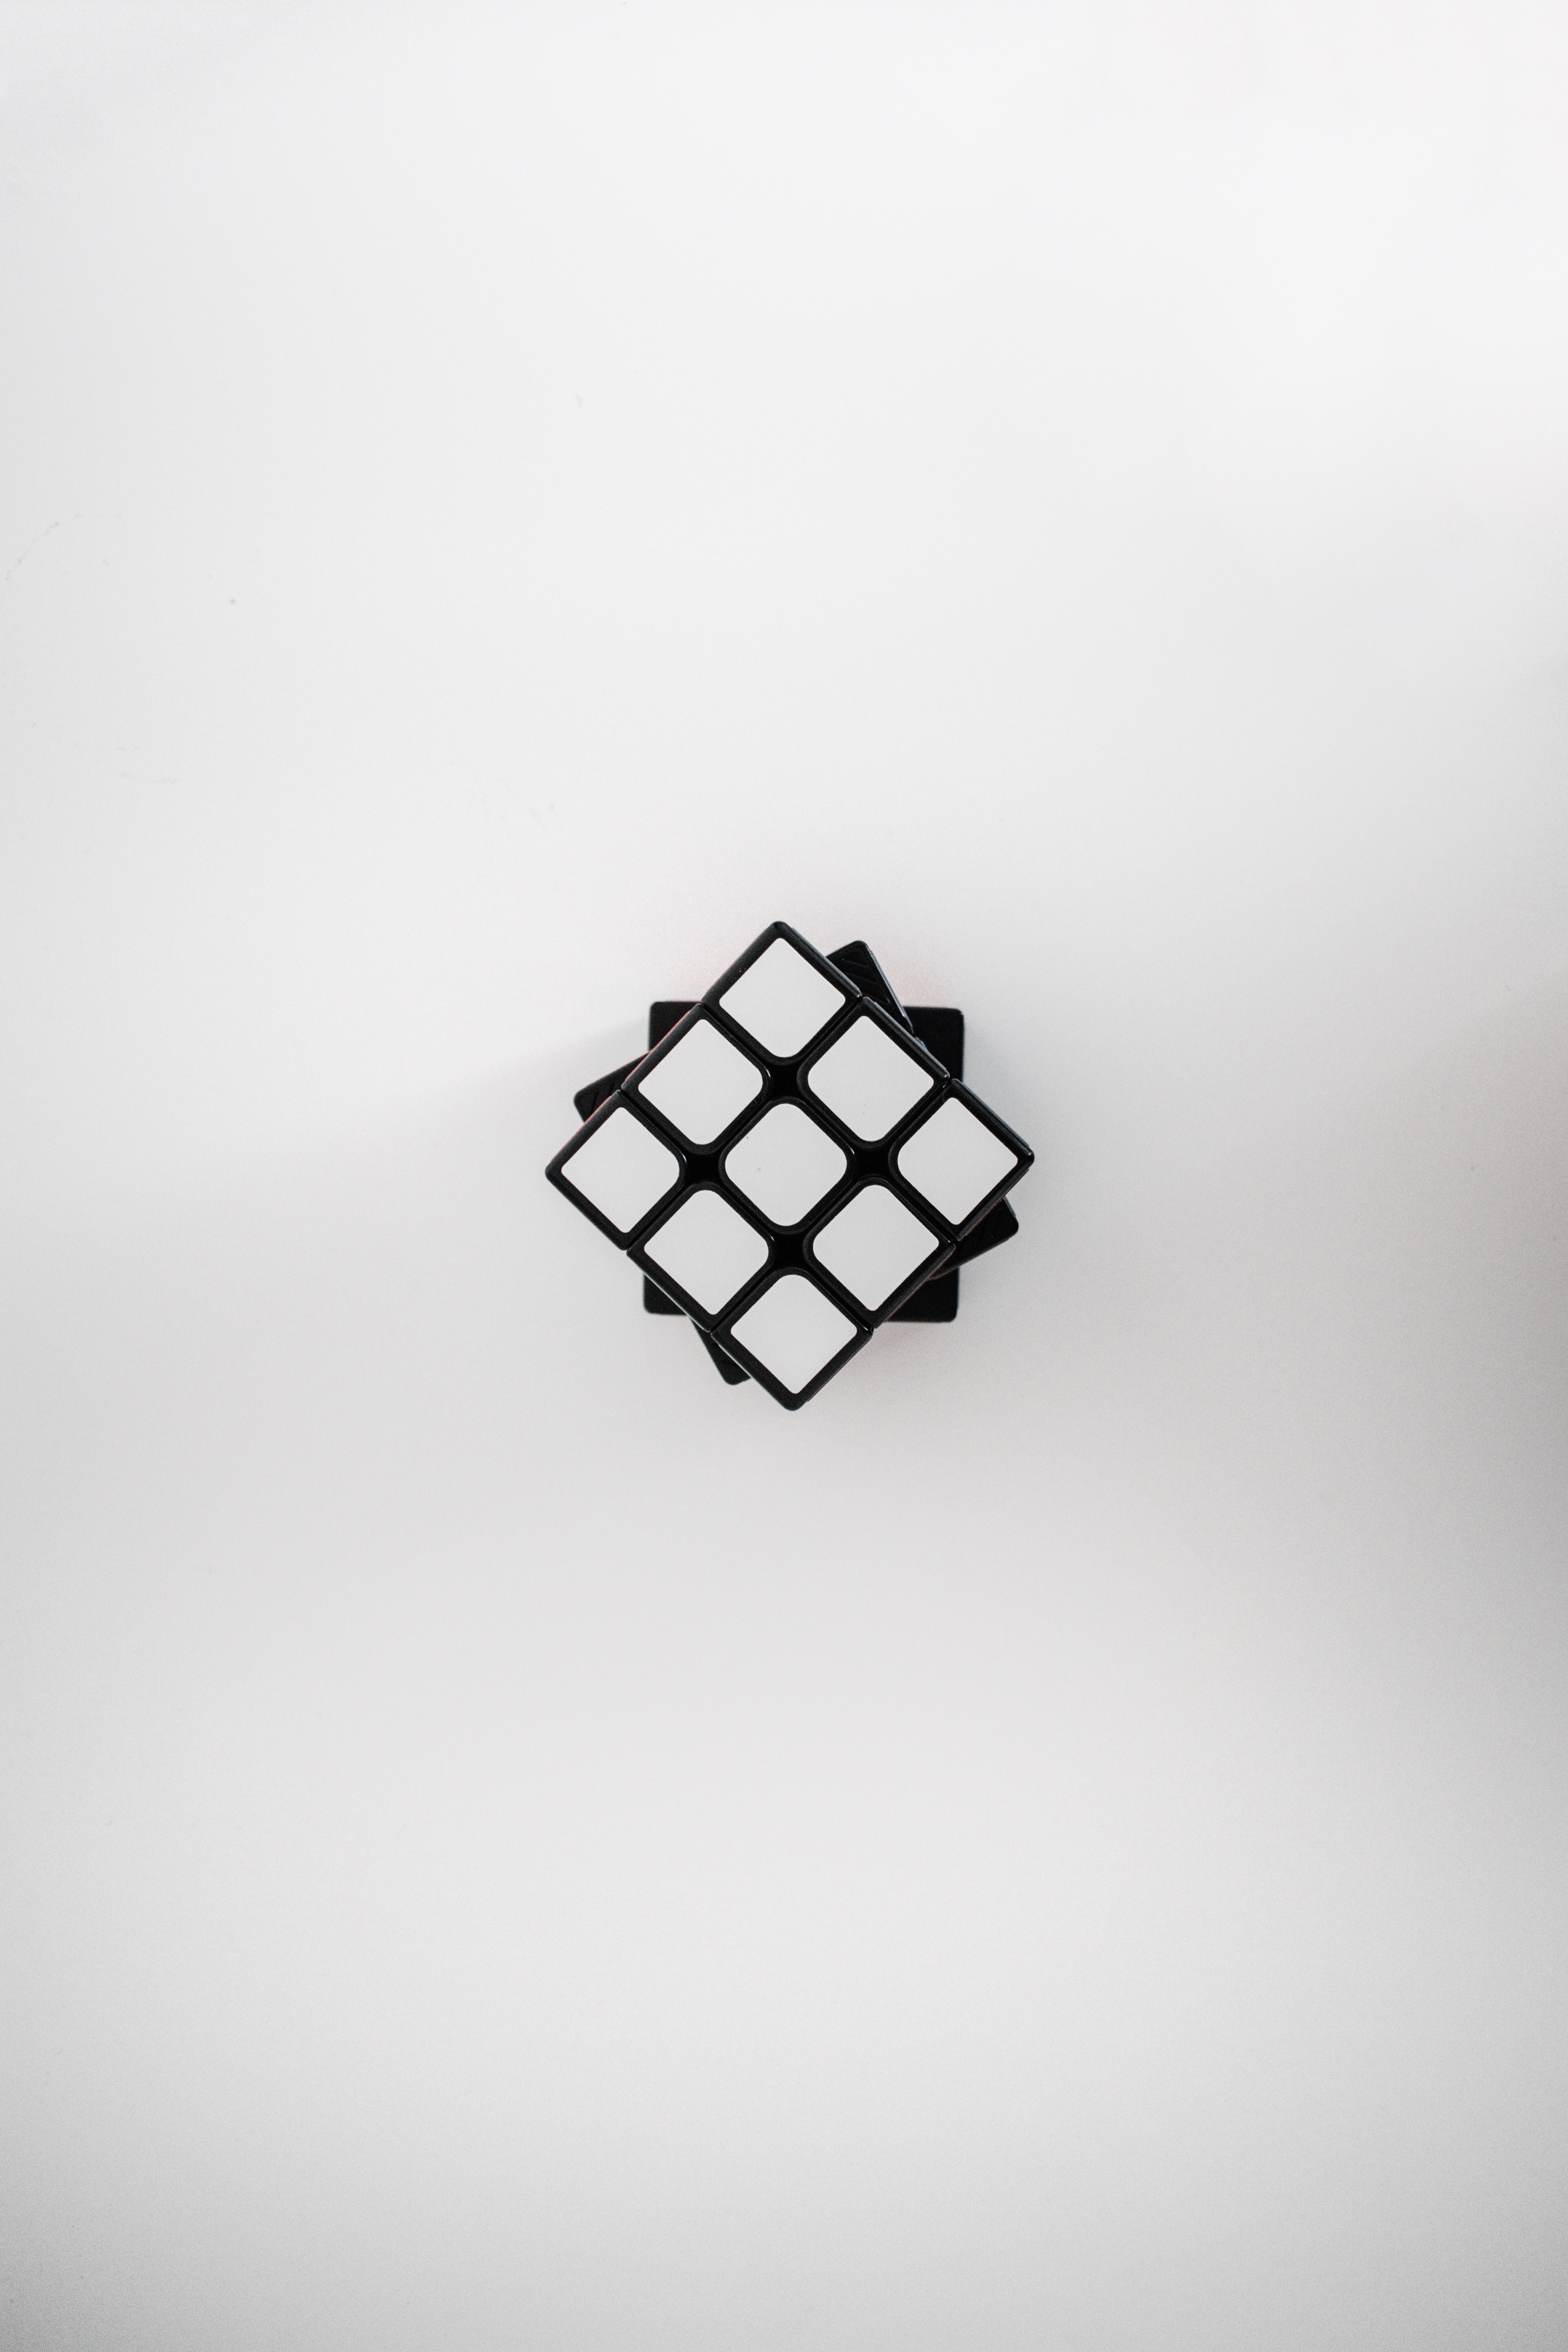 rubik's cube, cube, miscellanea, white, view from above, miscellaneous